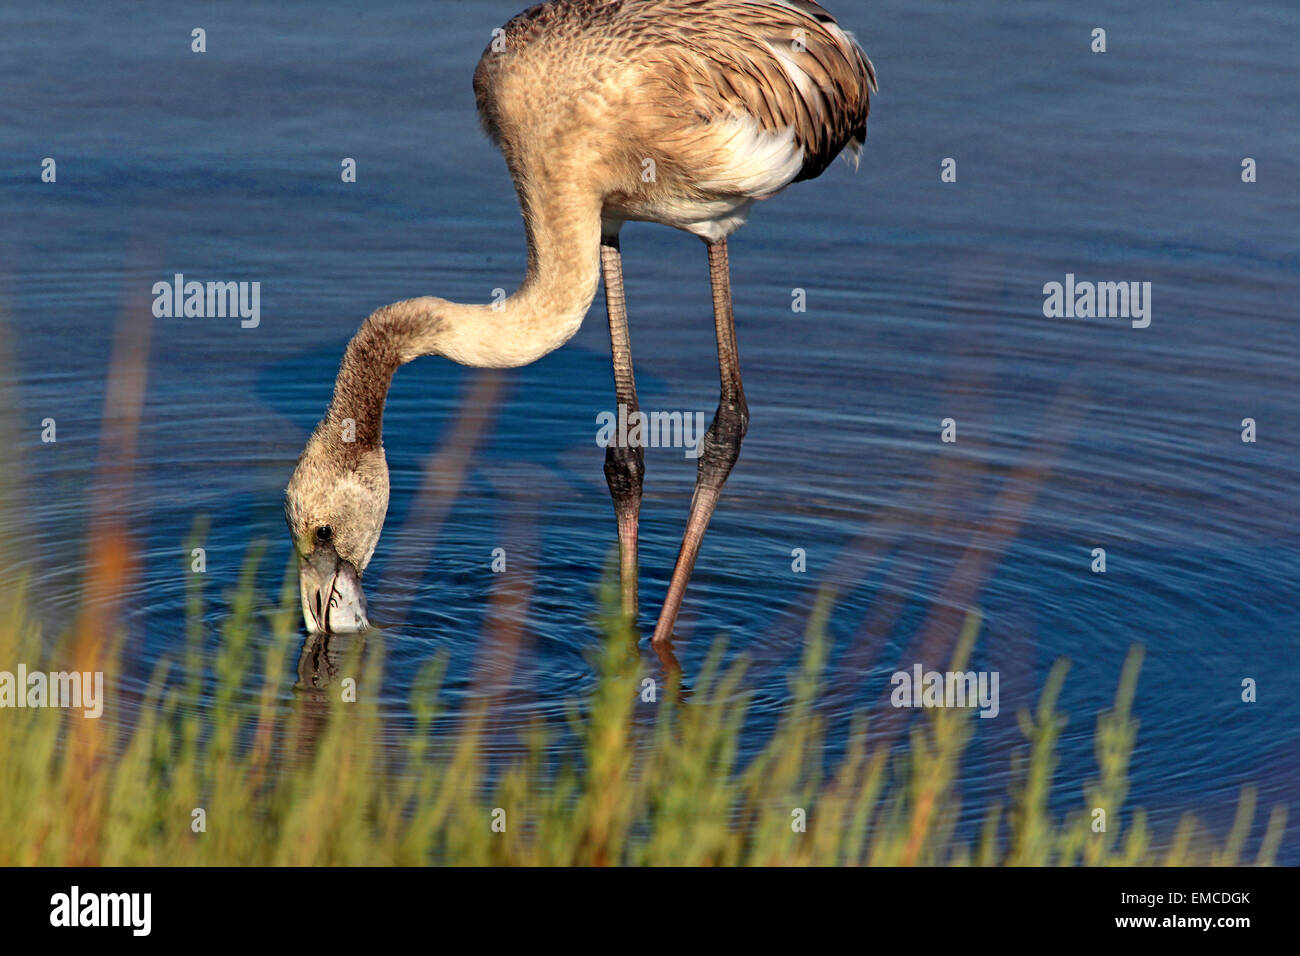 Young Roseate Flamingo (Phoenicopterus roseus) eating in Water Stock Photo